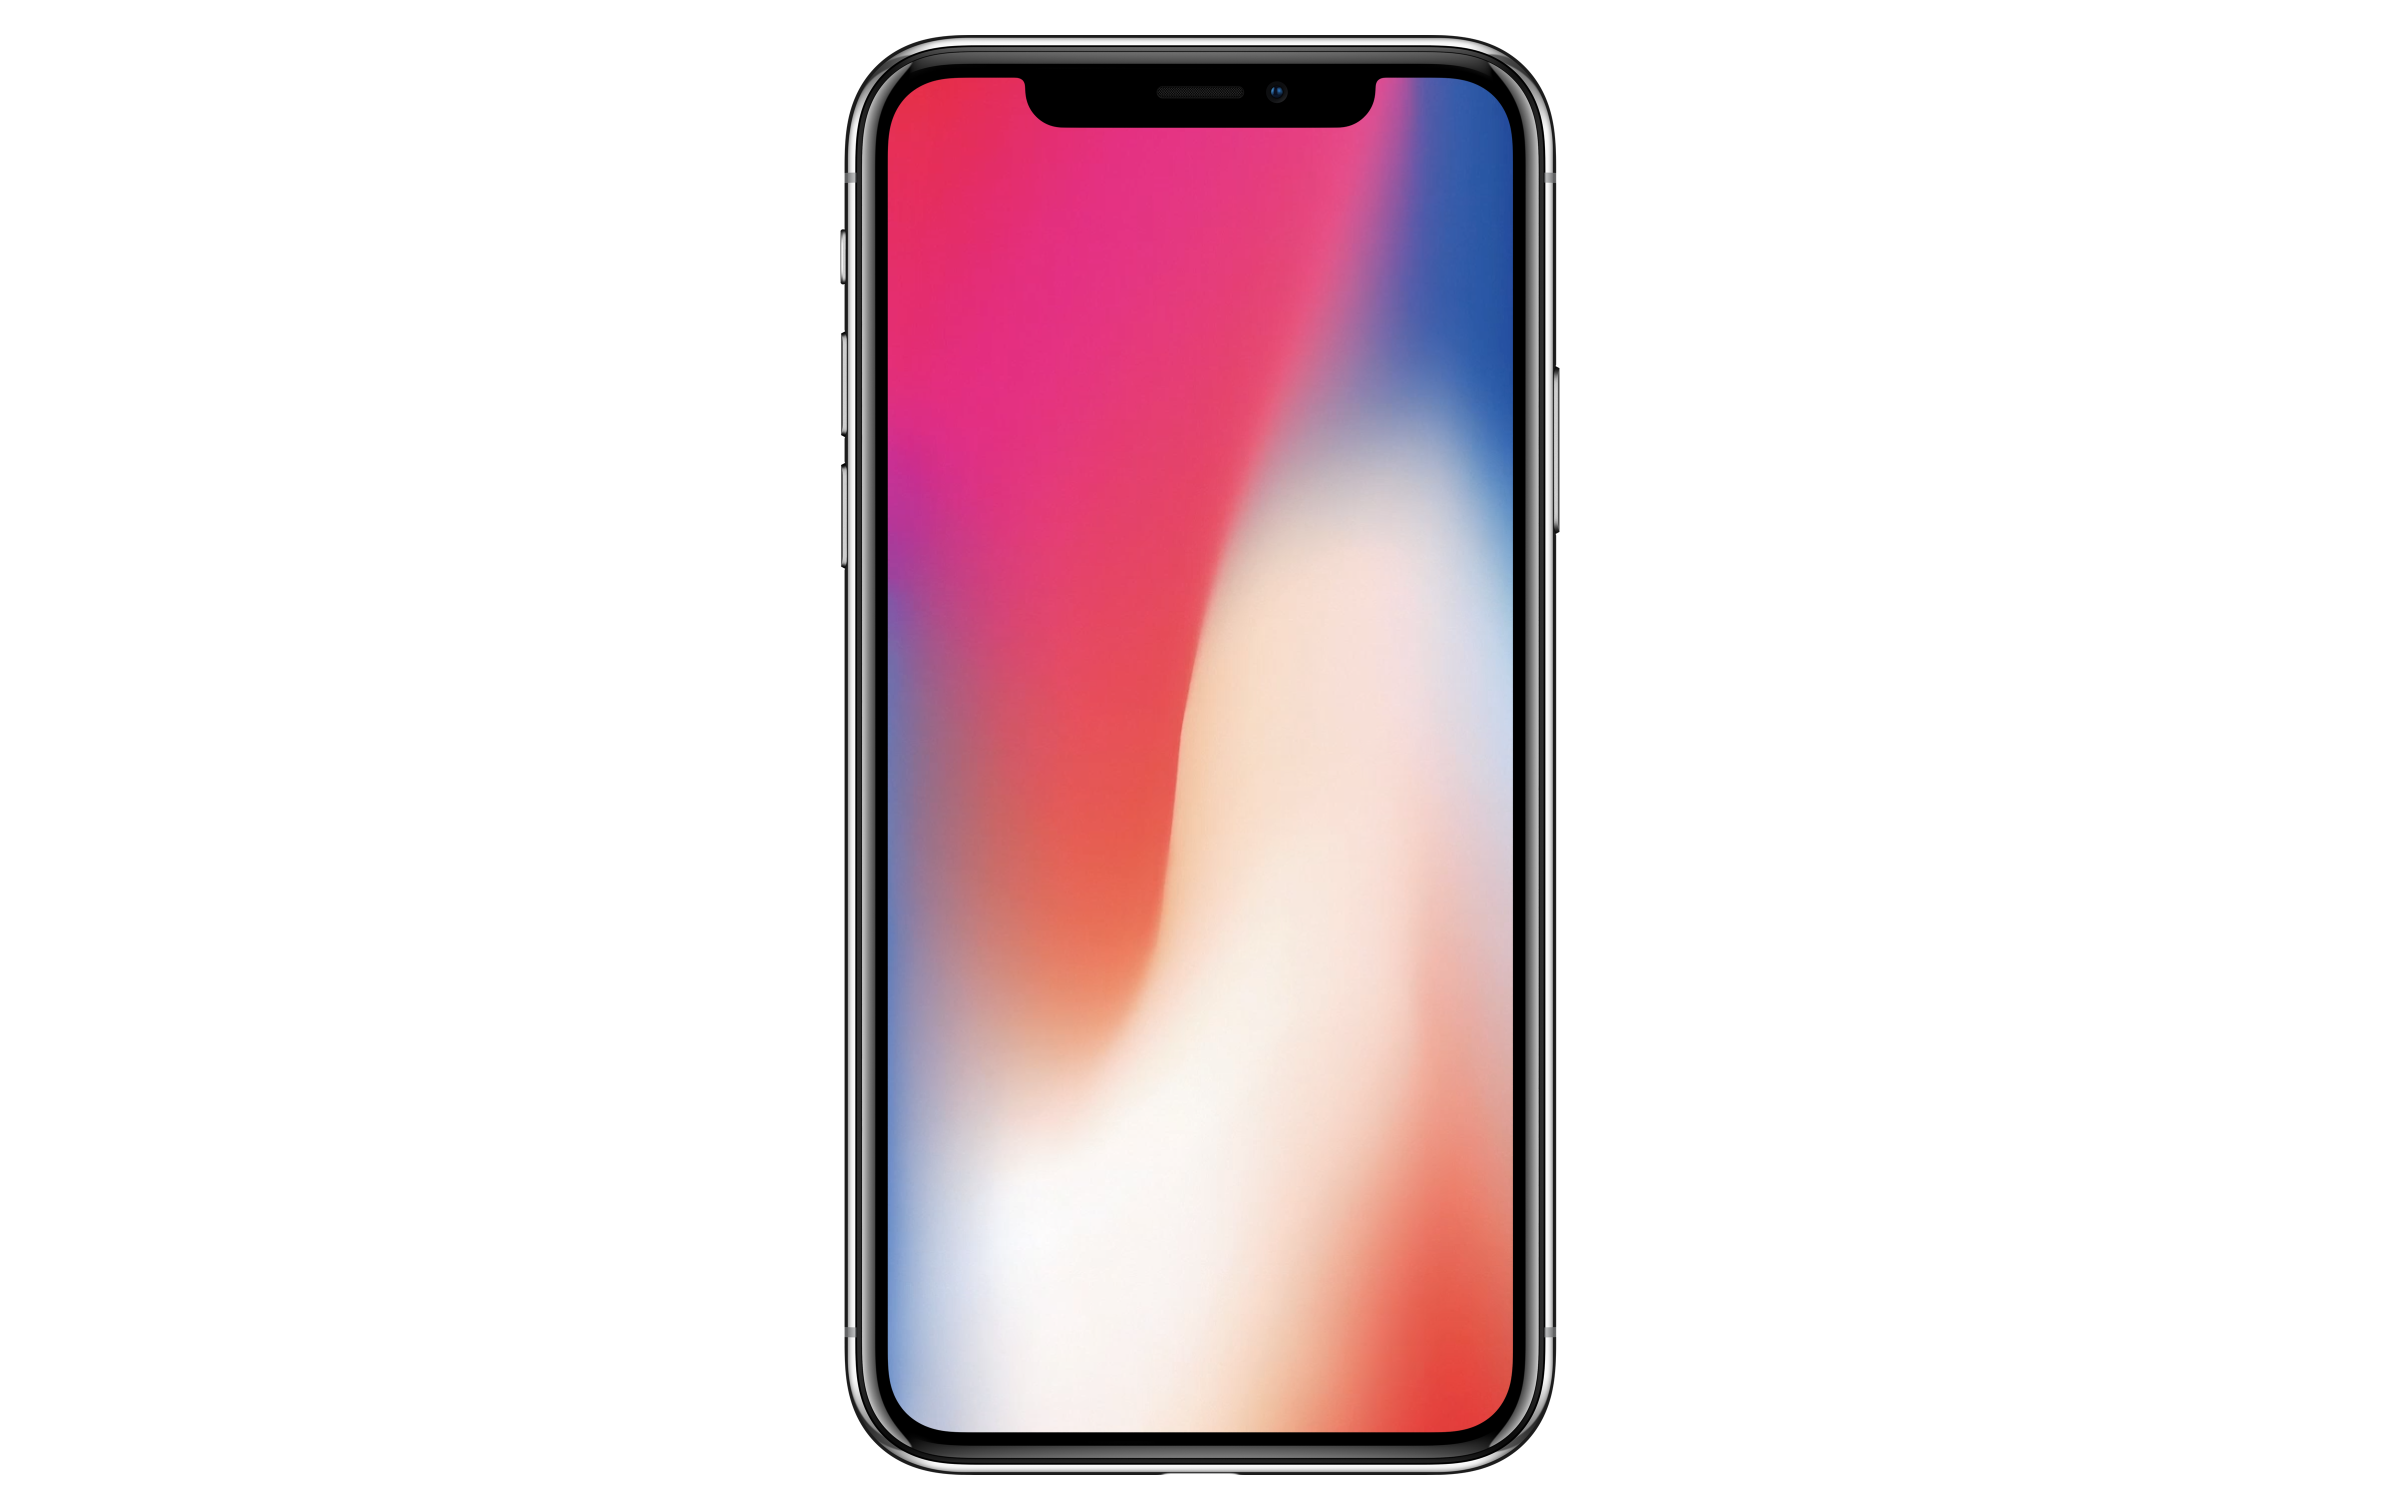 The iPhone X as seen on Apple's website